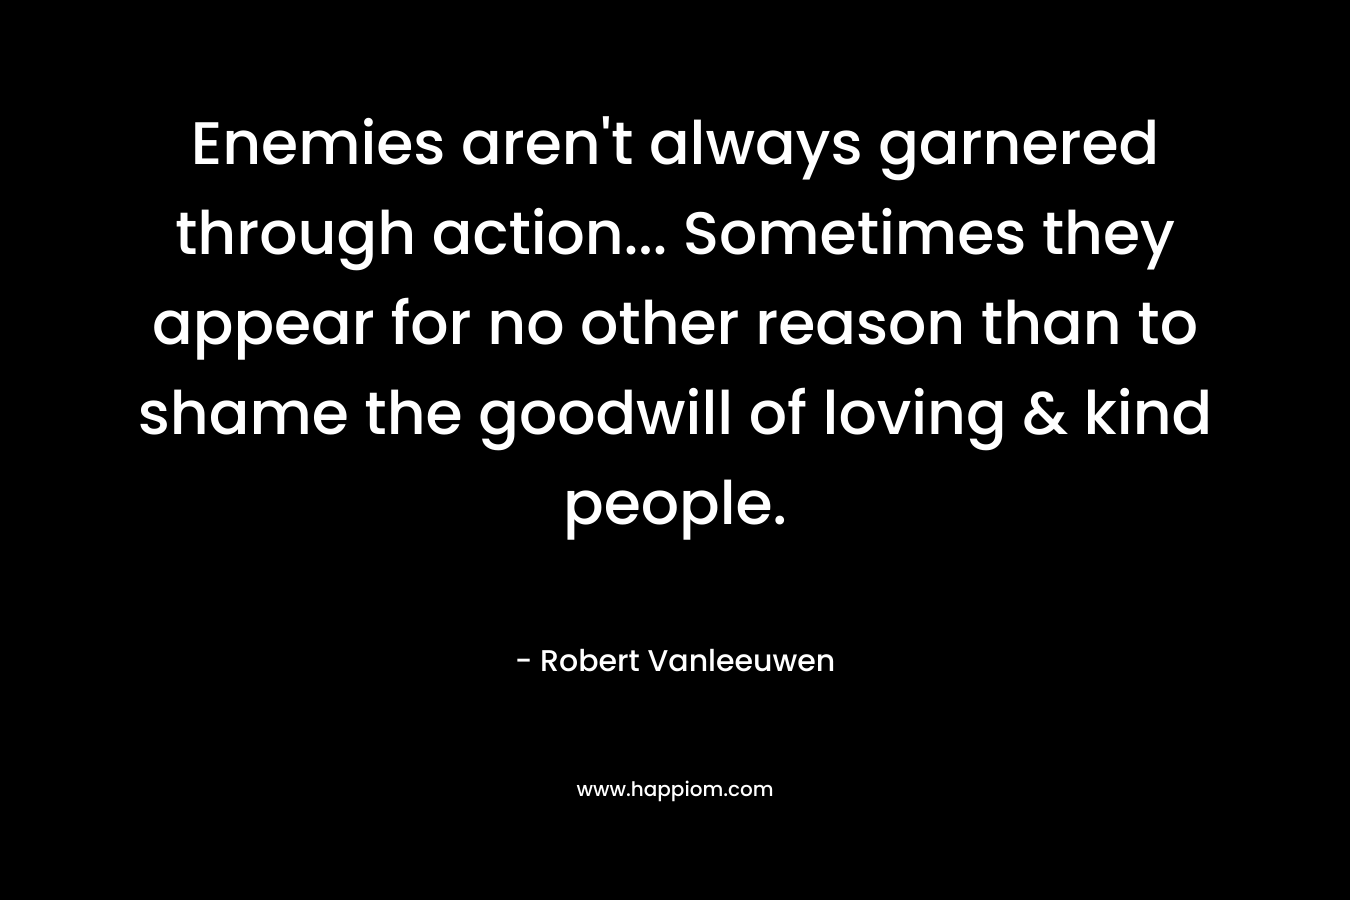 Enemies aren’t always garnered through action… Sometimes they appear for no other reason than to shame the goodwill of loving & kind people. – Robert Vanleeuwen